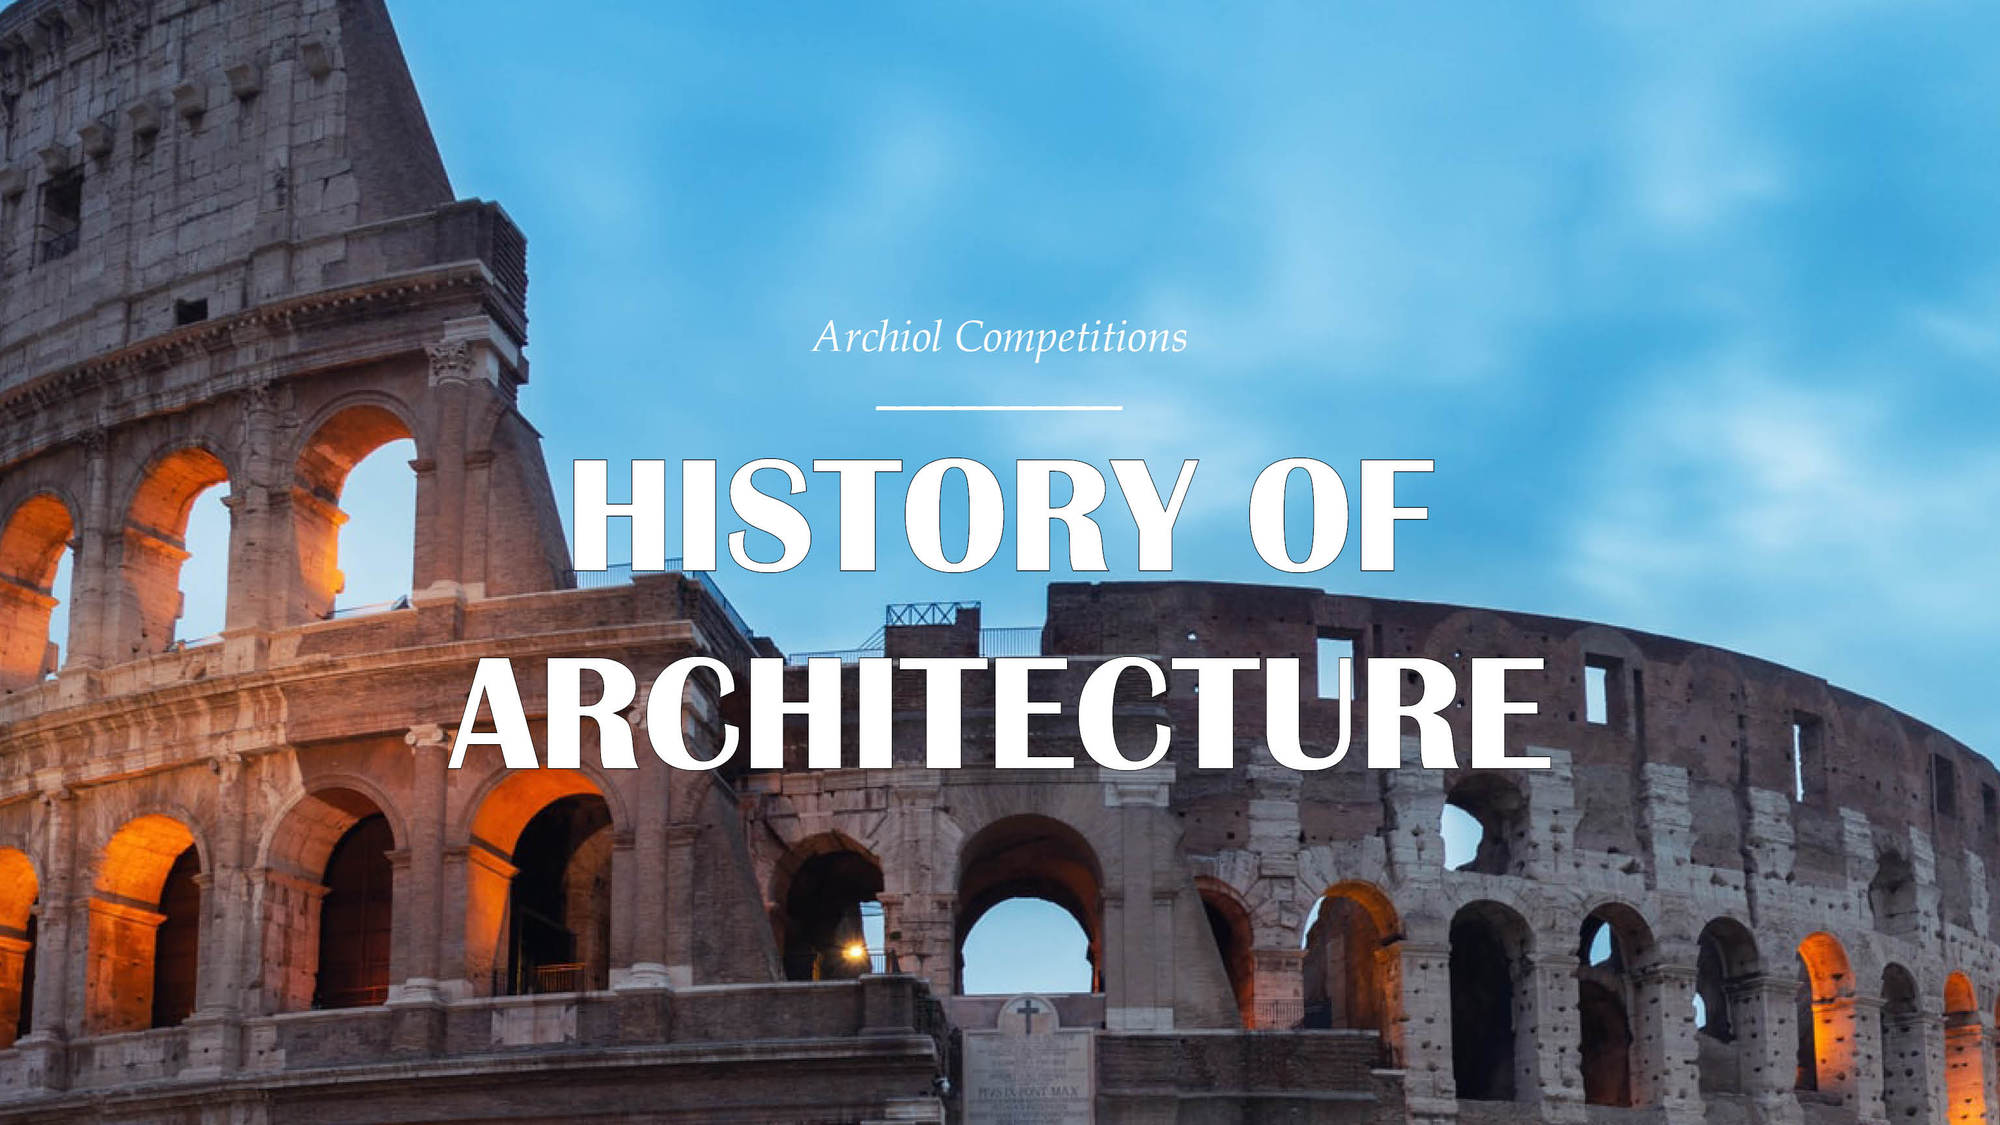 History of architecture